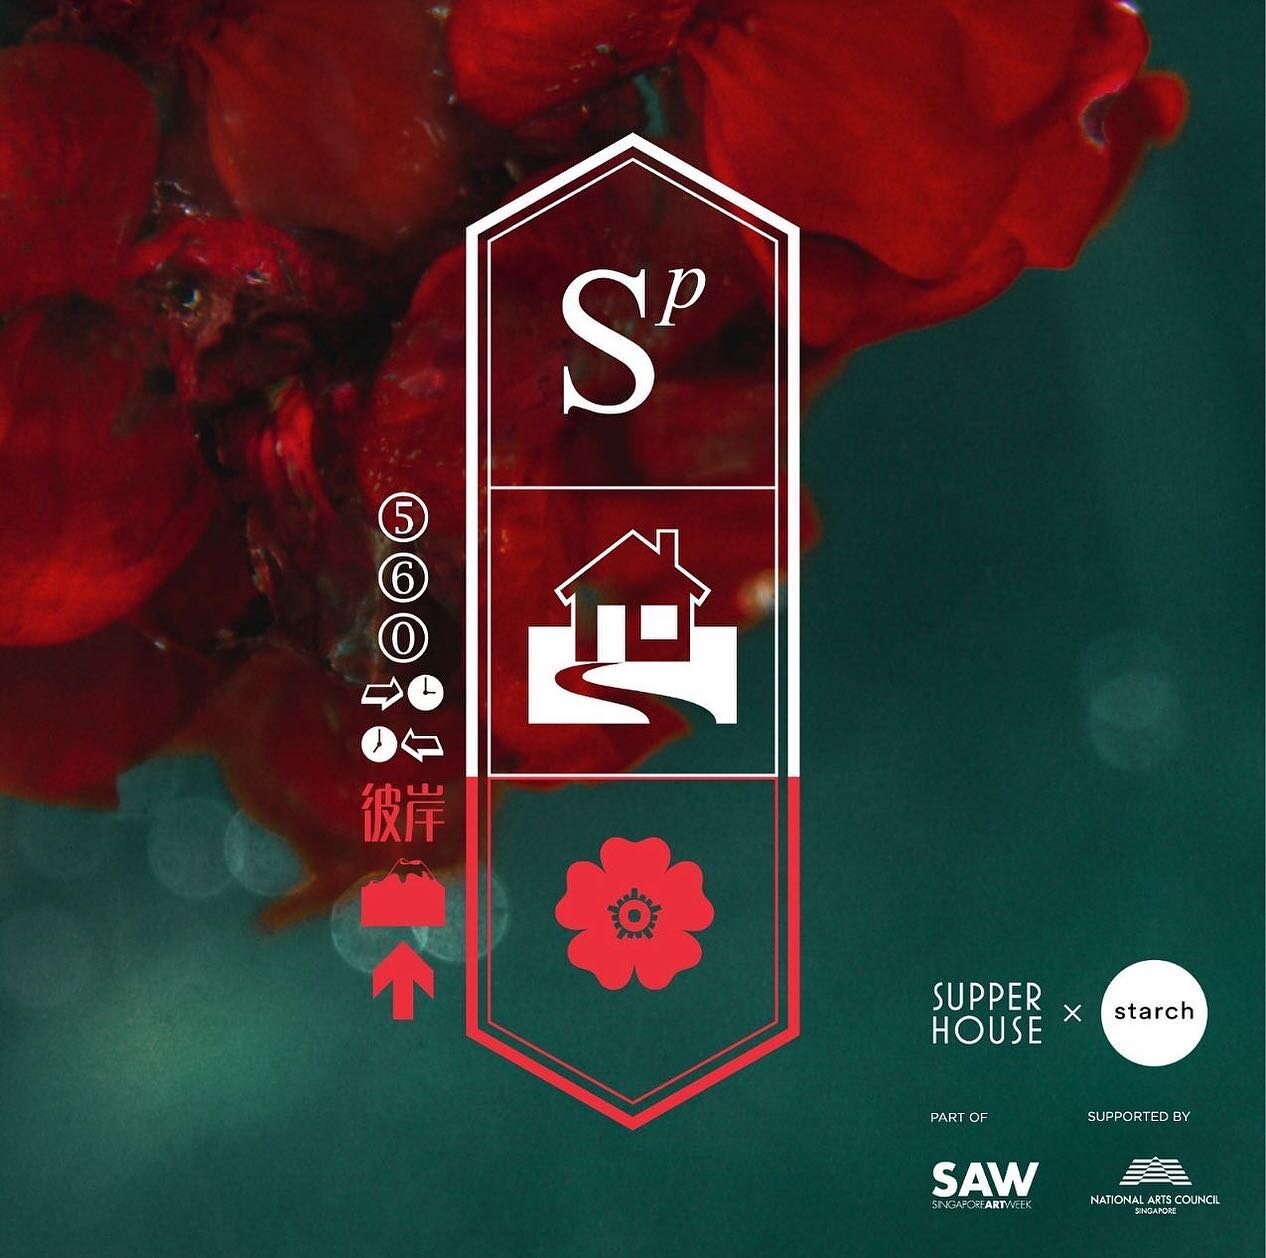 Hello friends, really grateful to be given the opportunity to present @supperhousesg for Singapore Artweek 2023, curated by @ashleychiam_ .🤗

Come join us for There are Flowers in the Morning Mist located at: 
222 Tagore Lane, 
#04-03
Singapore 7876